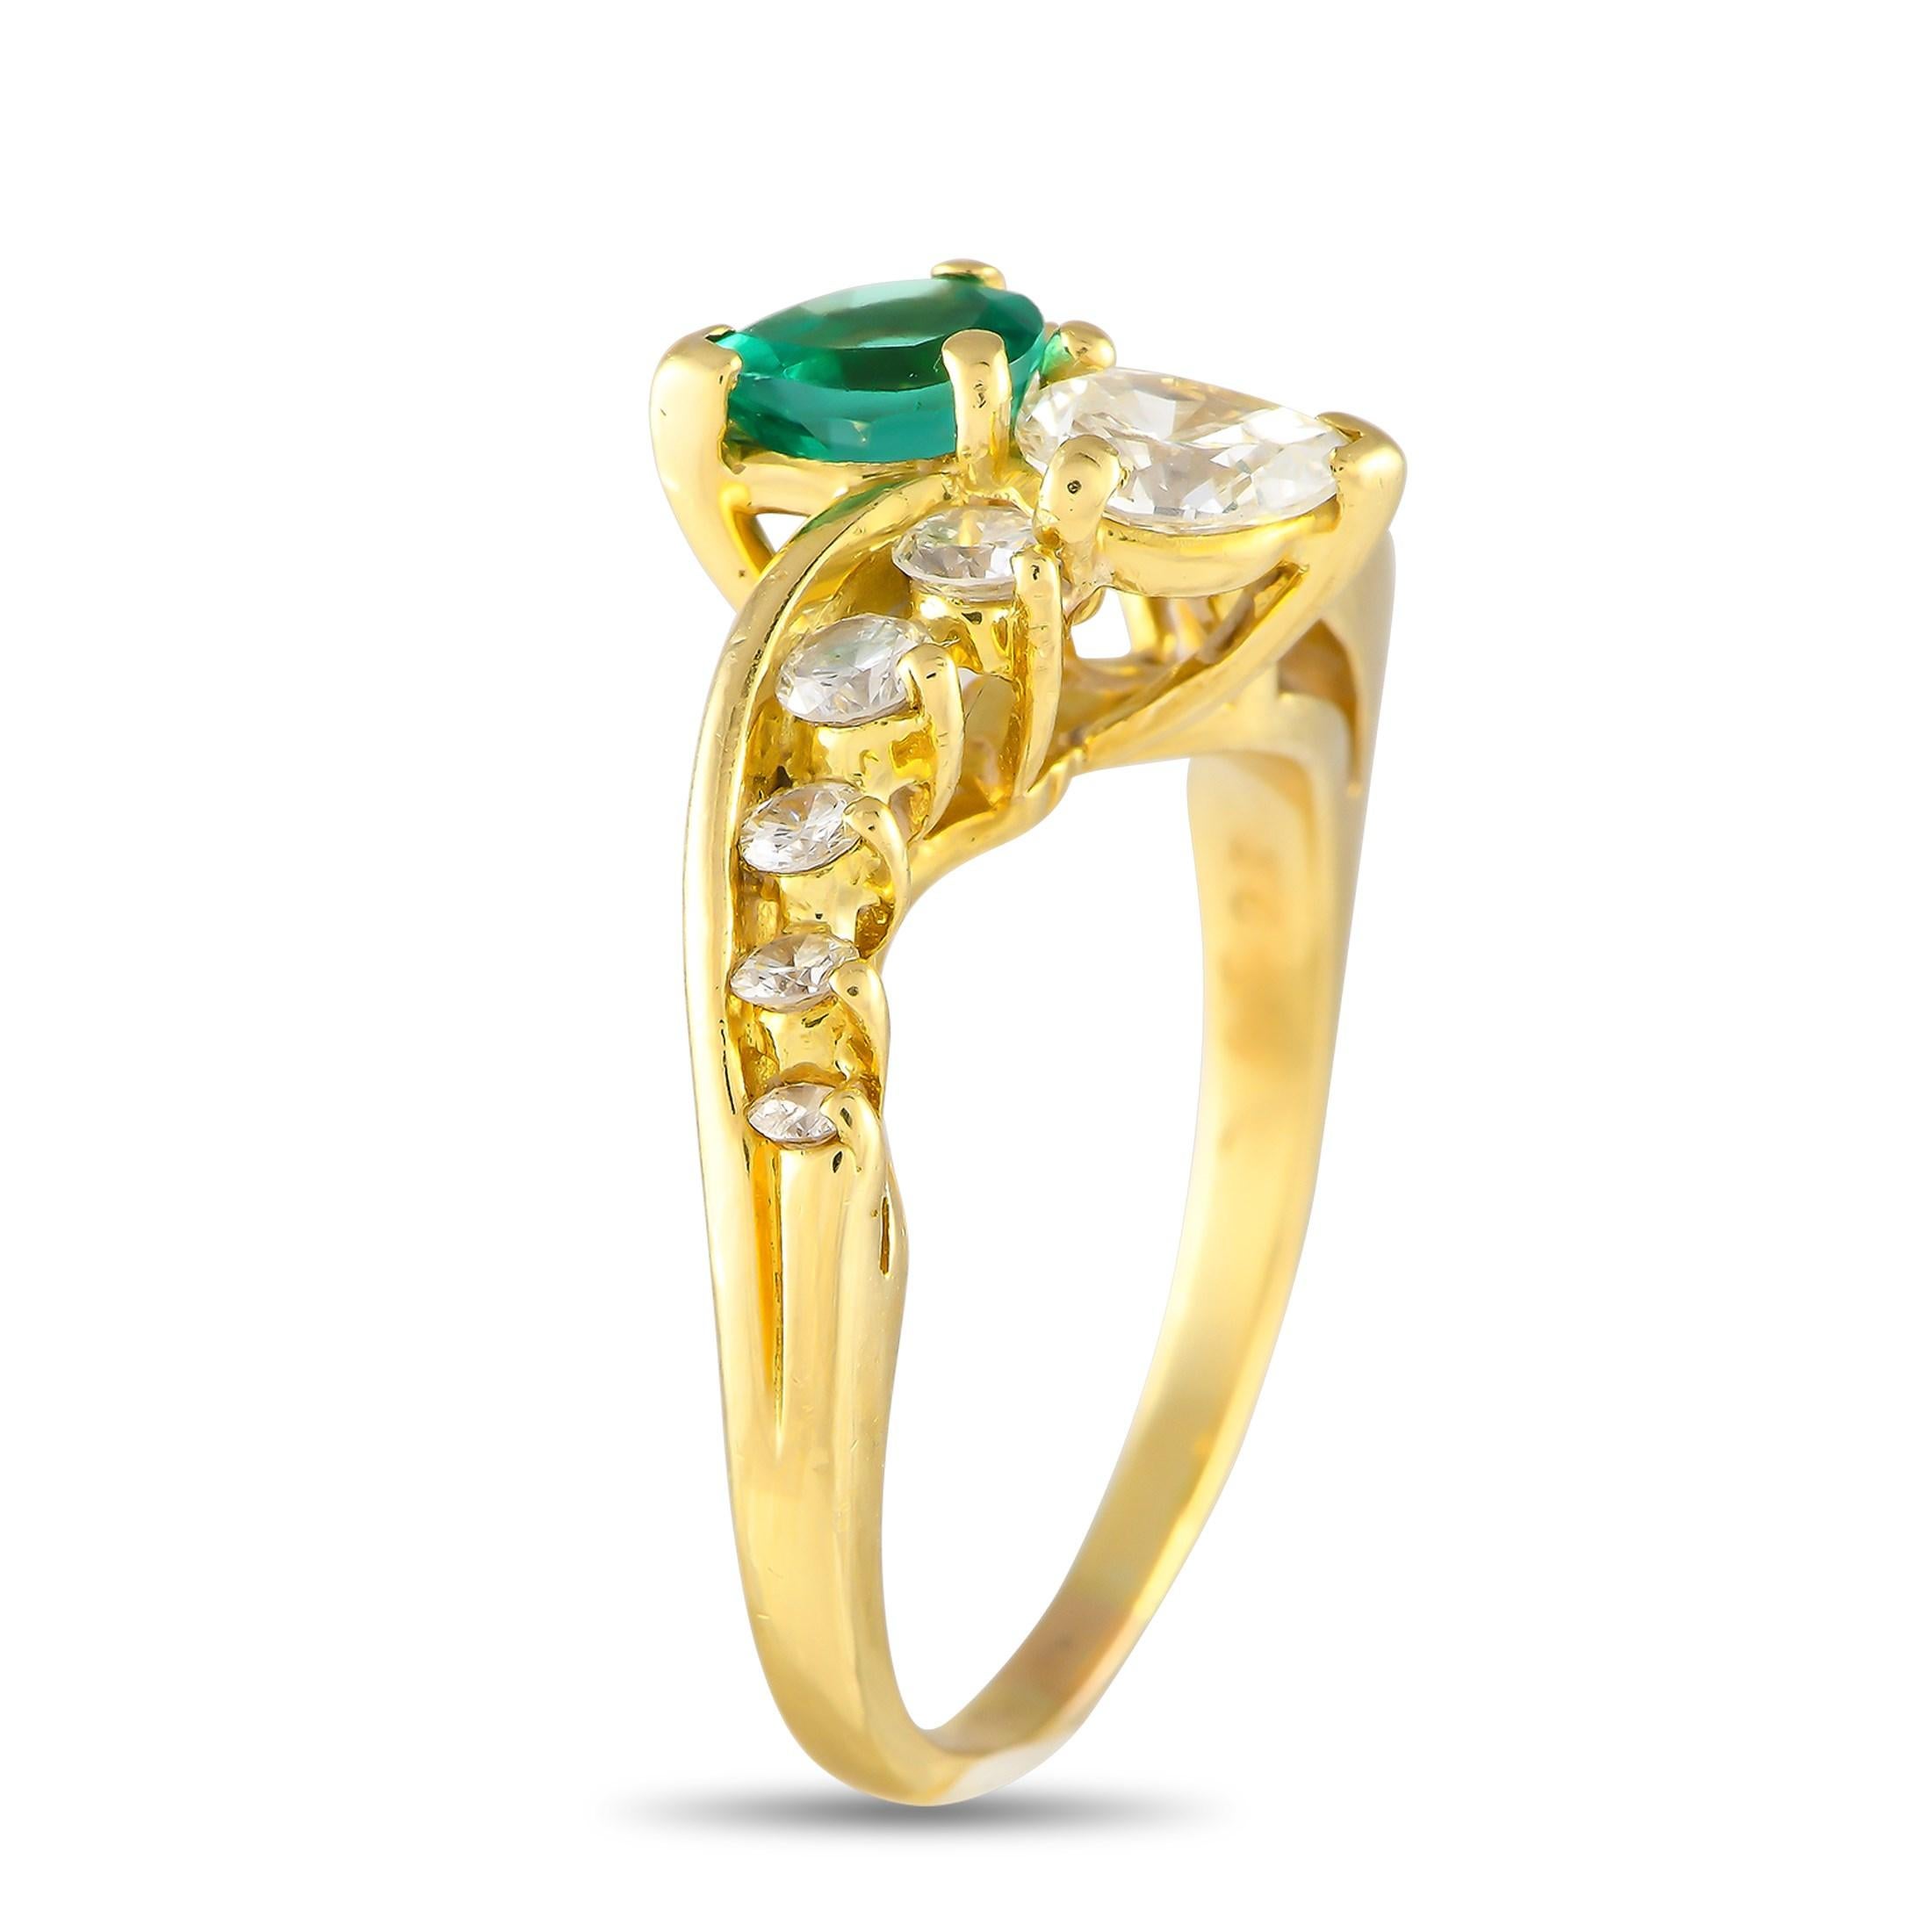 A unique arrangement of glittering gemstones makes this luxury ring instantly captivating. Round-cut Diamonds and a pear-shaped Diamond center stone possess a total weight of 1.0 carats, while a 0.65 carat pear-shaped Emerald accent provides the